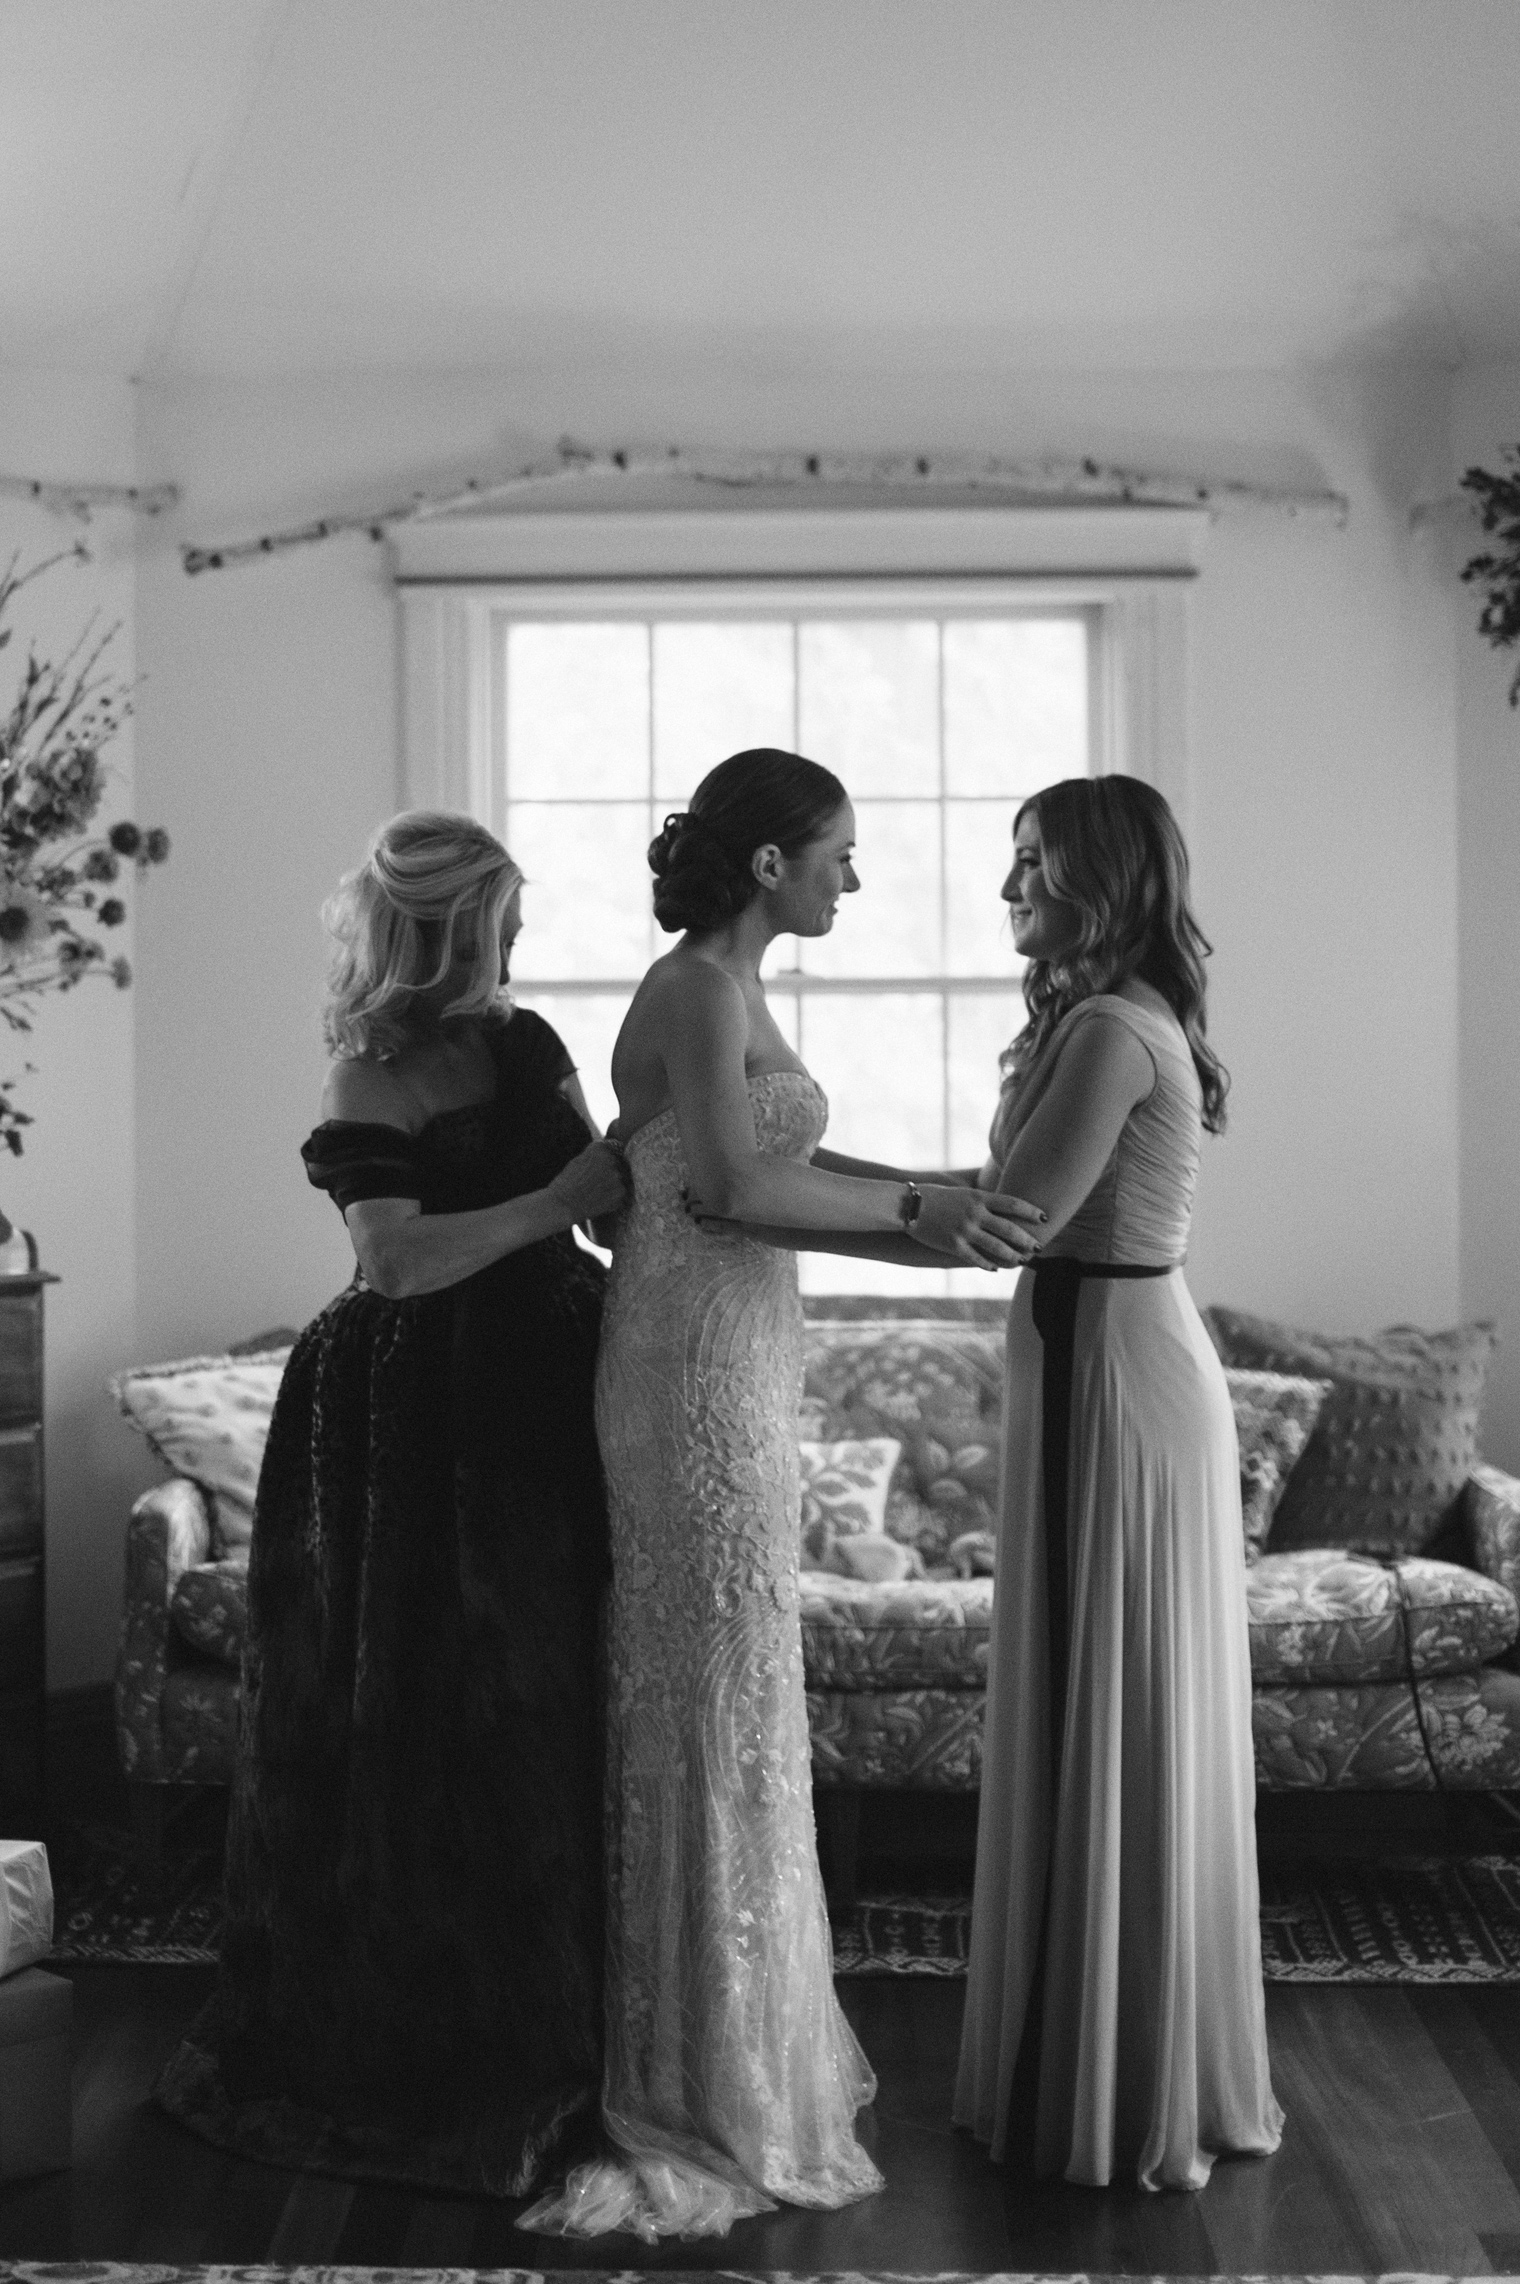 The mother of the bride and maid of honor help a bride into her Monique Lhuillier gown.